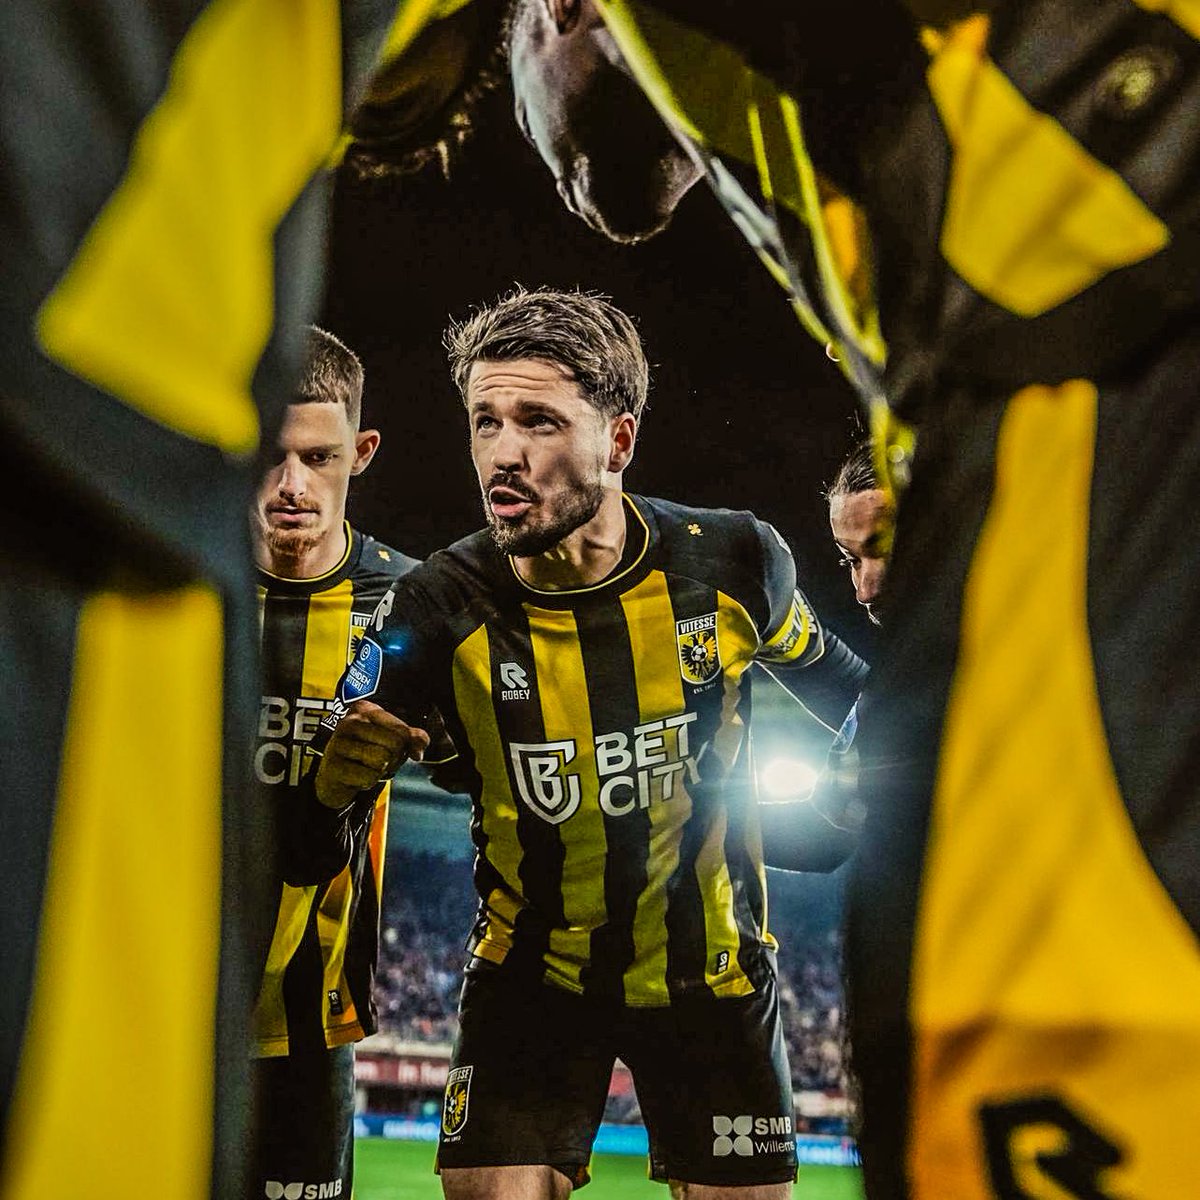 🚨🇳🇱 𝐁𝐑𝐄𝐀𝐊𝐈𝐍𝐆 | Eredivise club Vitesse are in serious risk of losing their professional licence. 😳

Had 18 points deducted recently, now club are asking fans to donate. 

Even former Vitesse players have donated to help situation. €500k raised already.